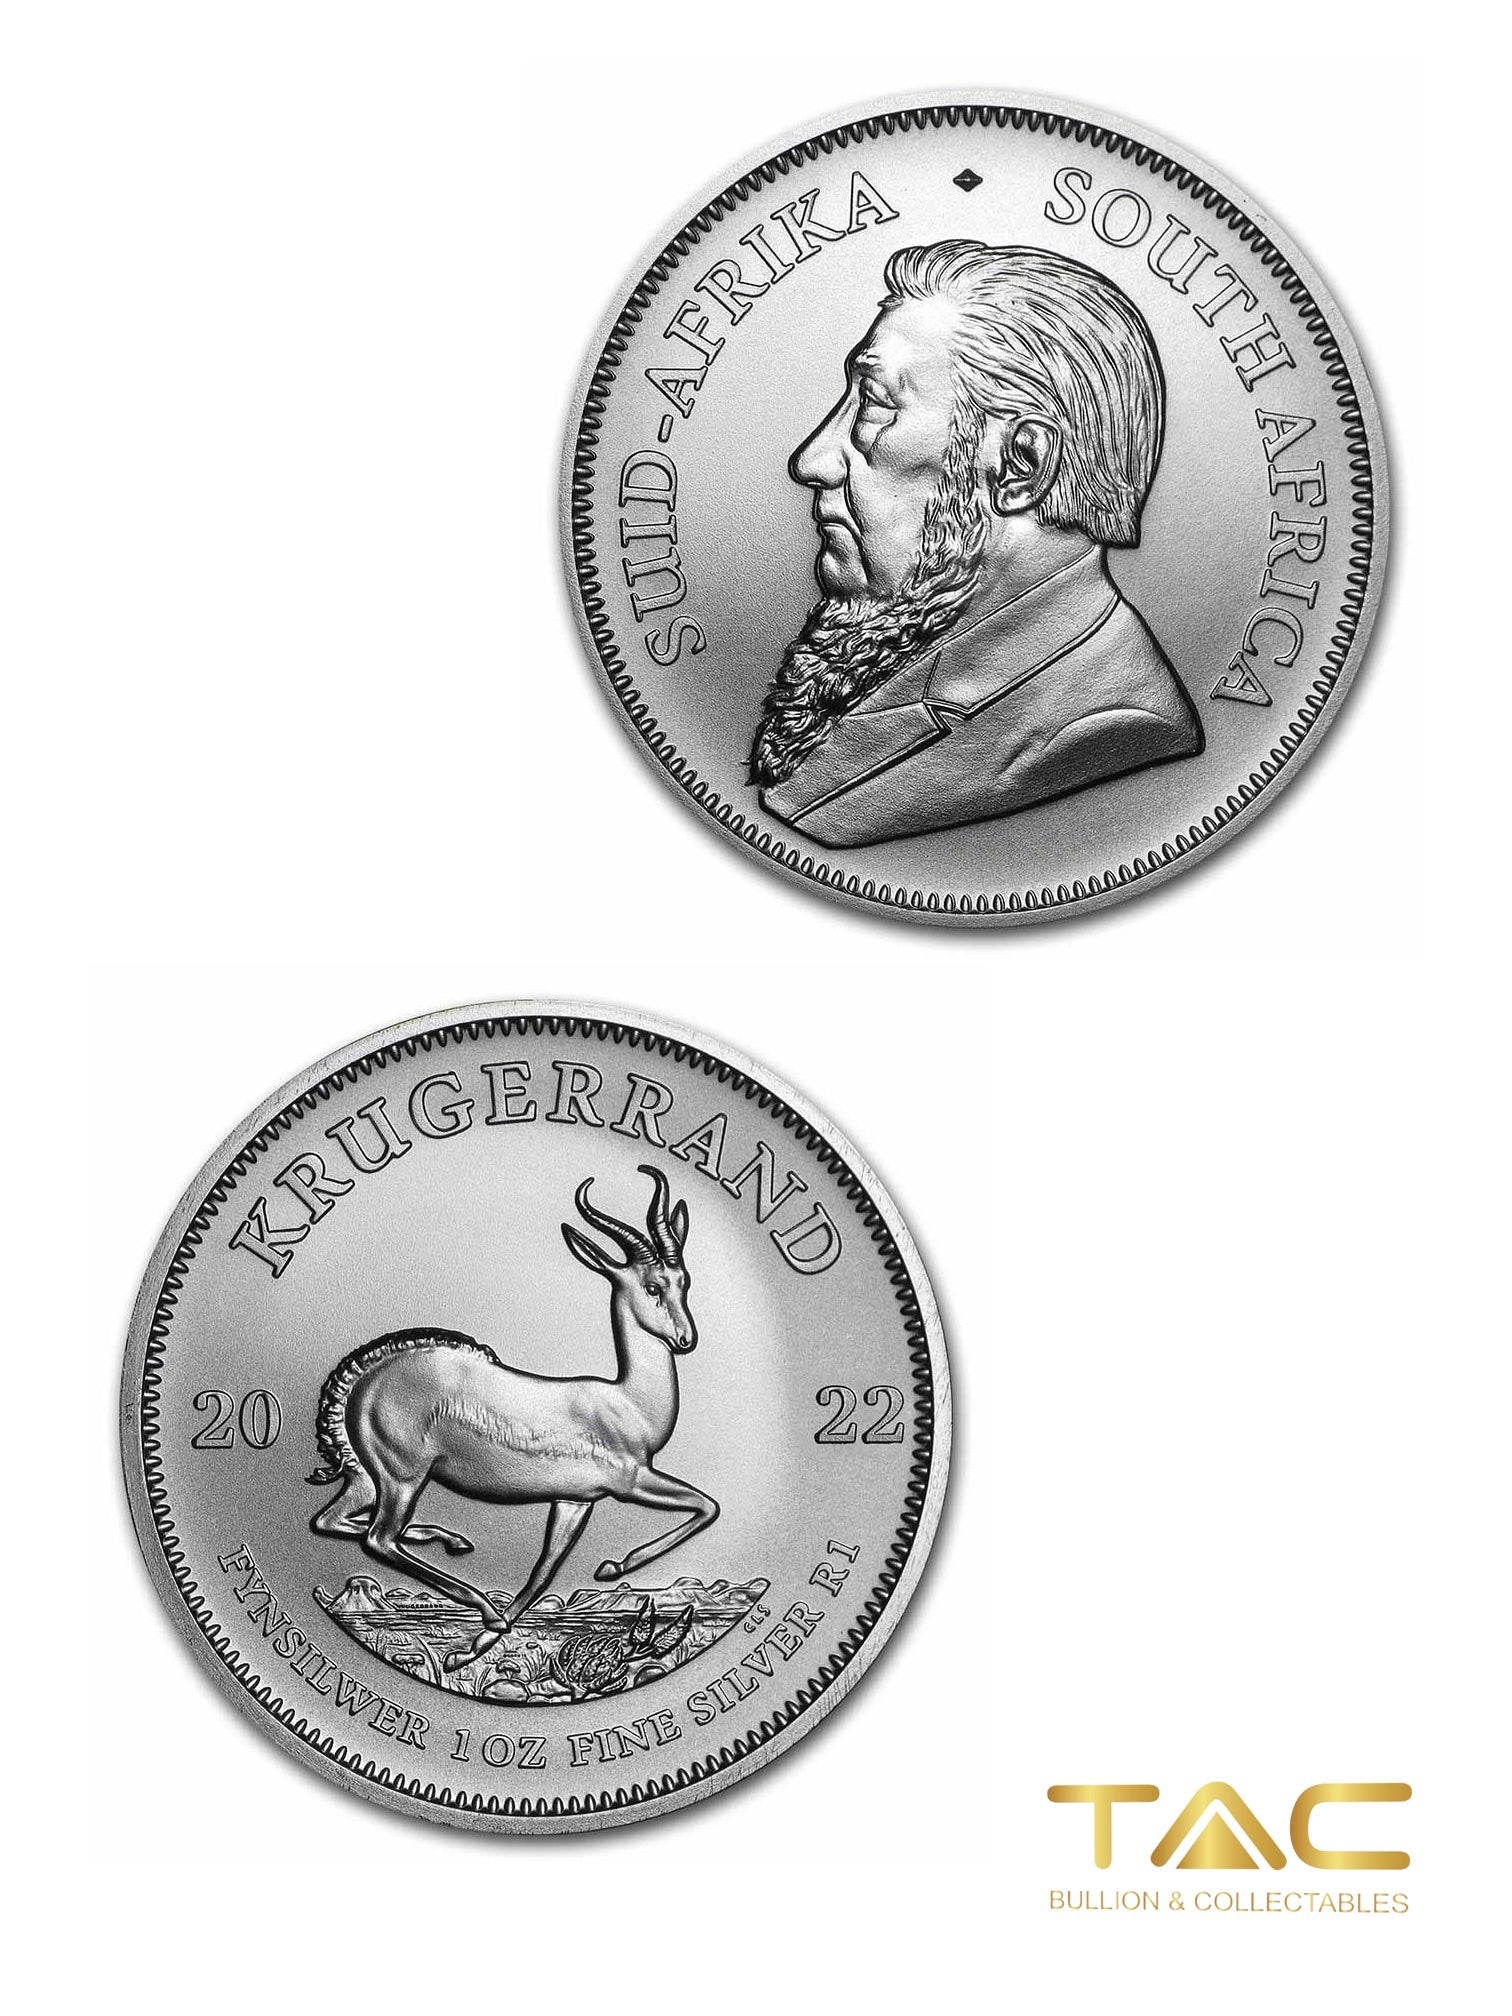 1 oz Silver Coin - 2022 Krugerrand - South African Mint